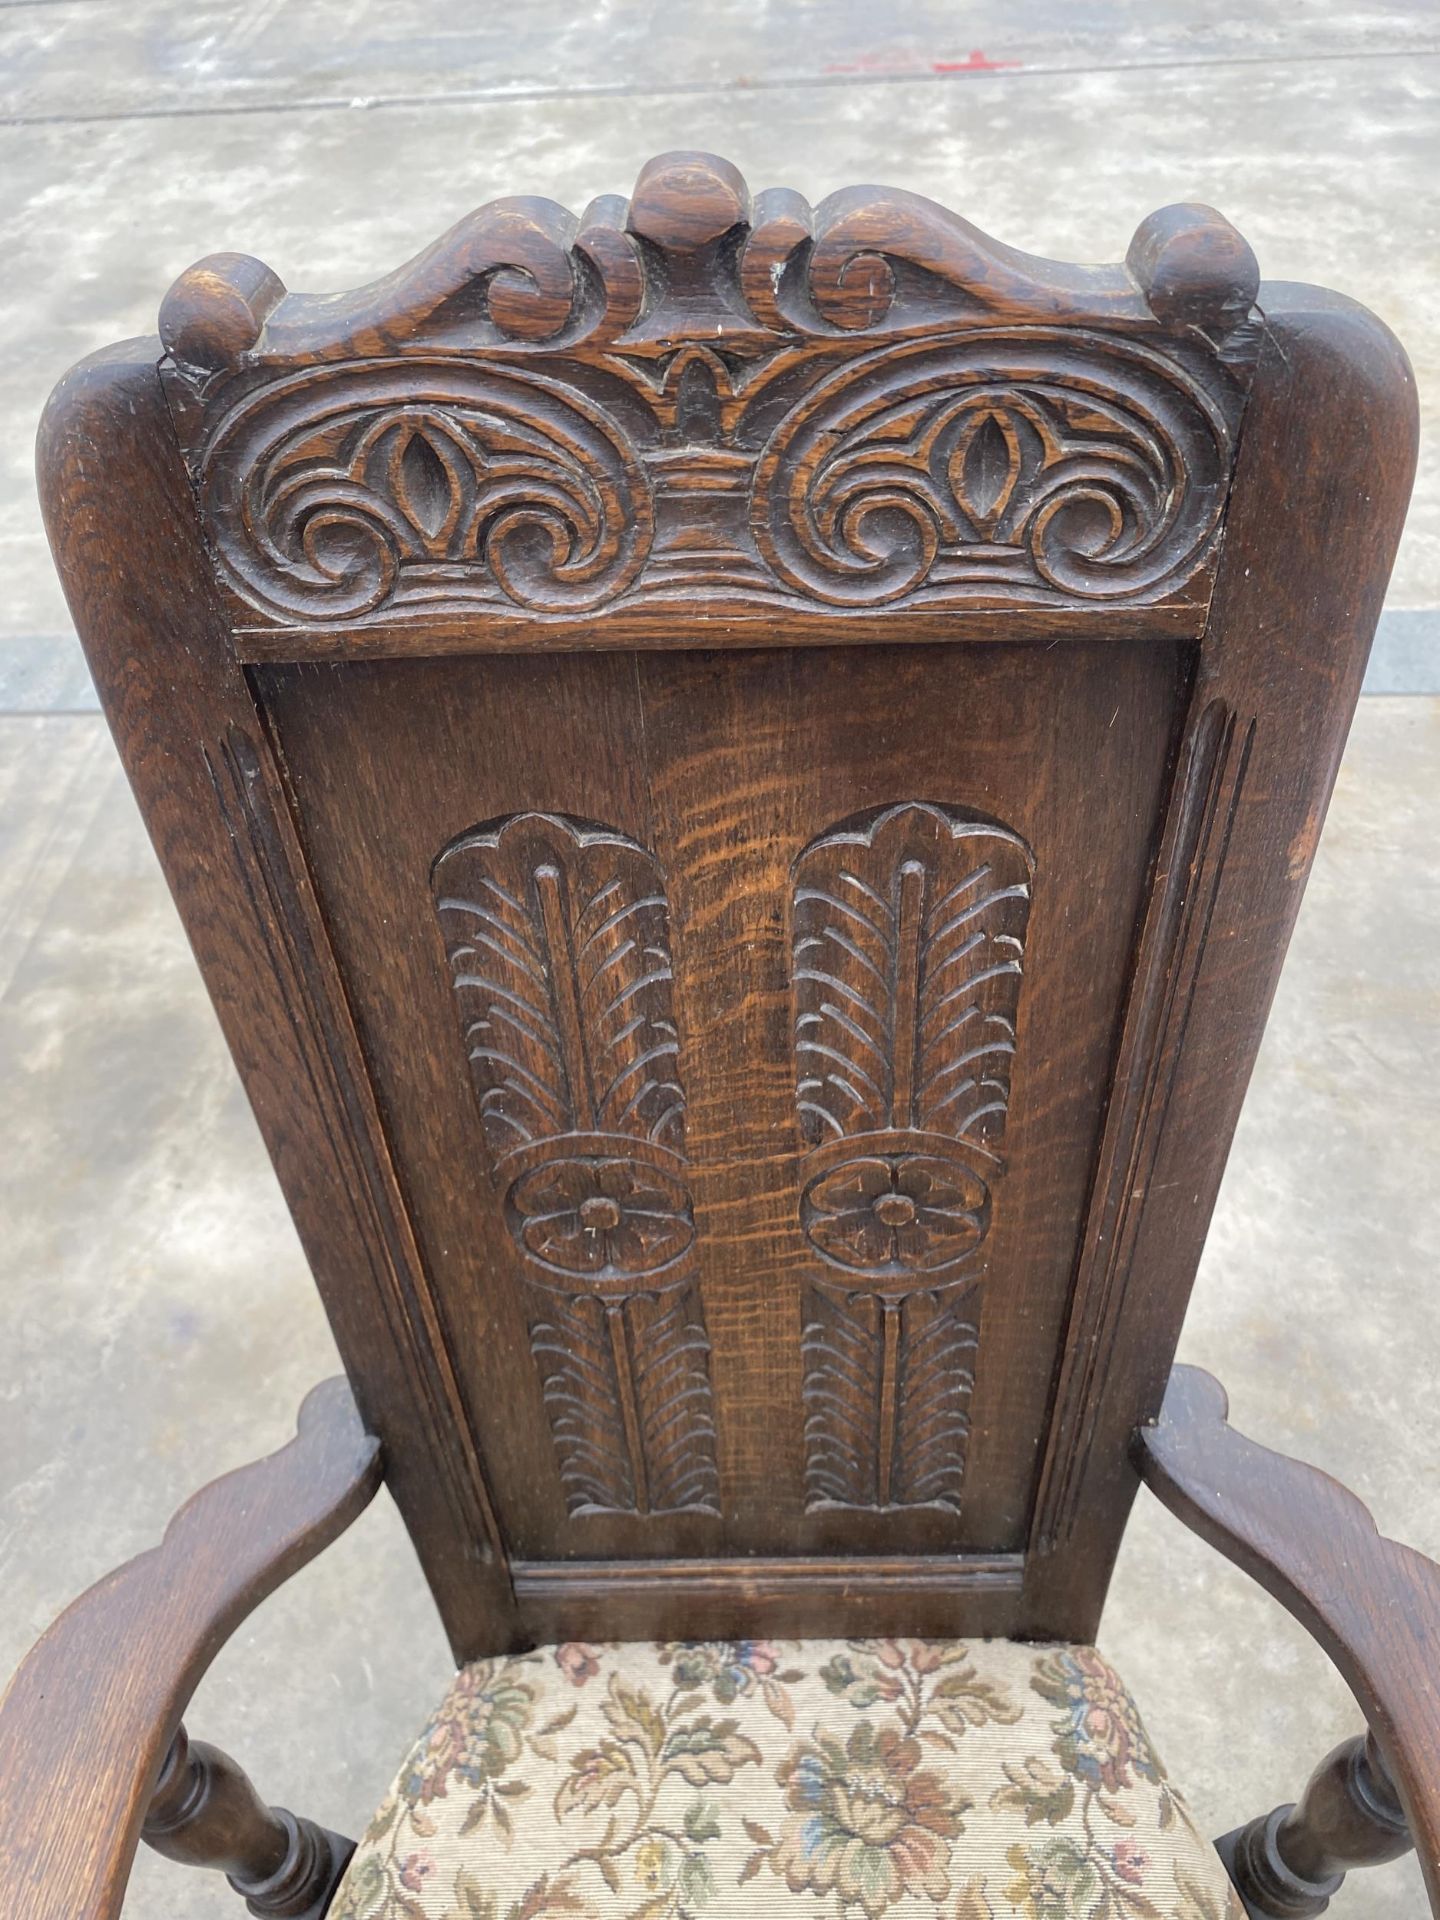 AN OAK EARLY 20TH CENTURY JACOBEAN STYLE THRONE CHAIR ON TURNED BULBOUS LEGS, WITH CARVED PANEL BACK - Image 4 of 5